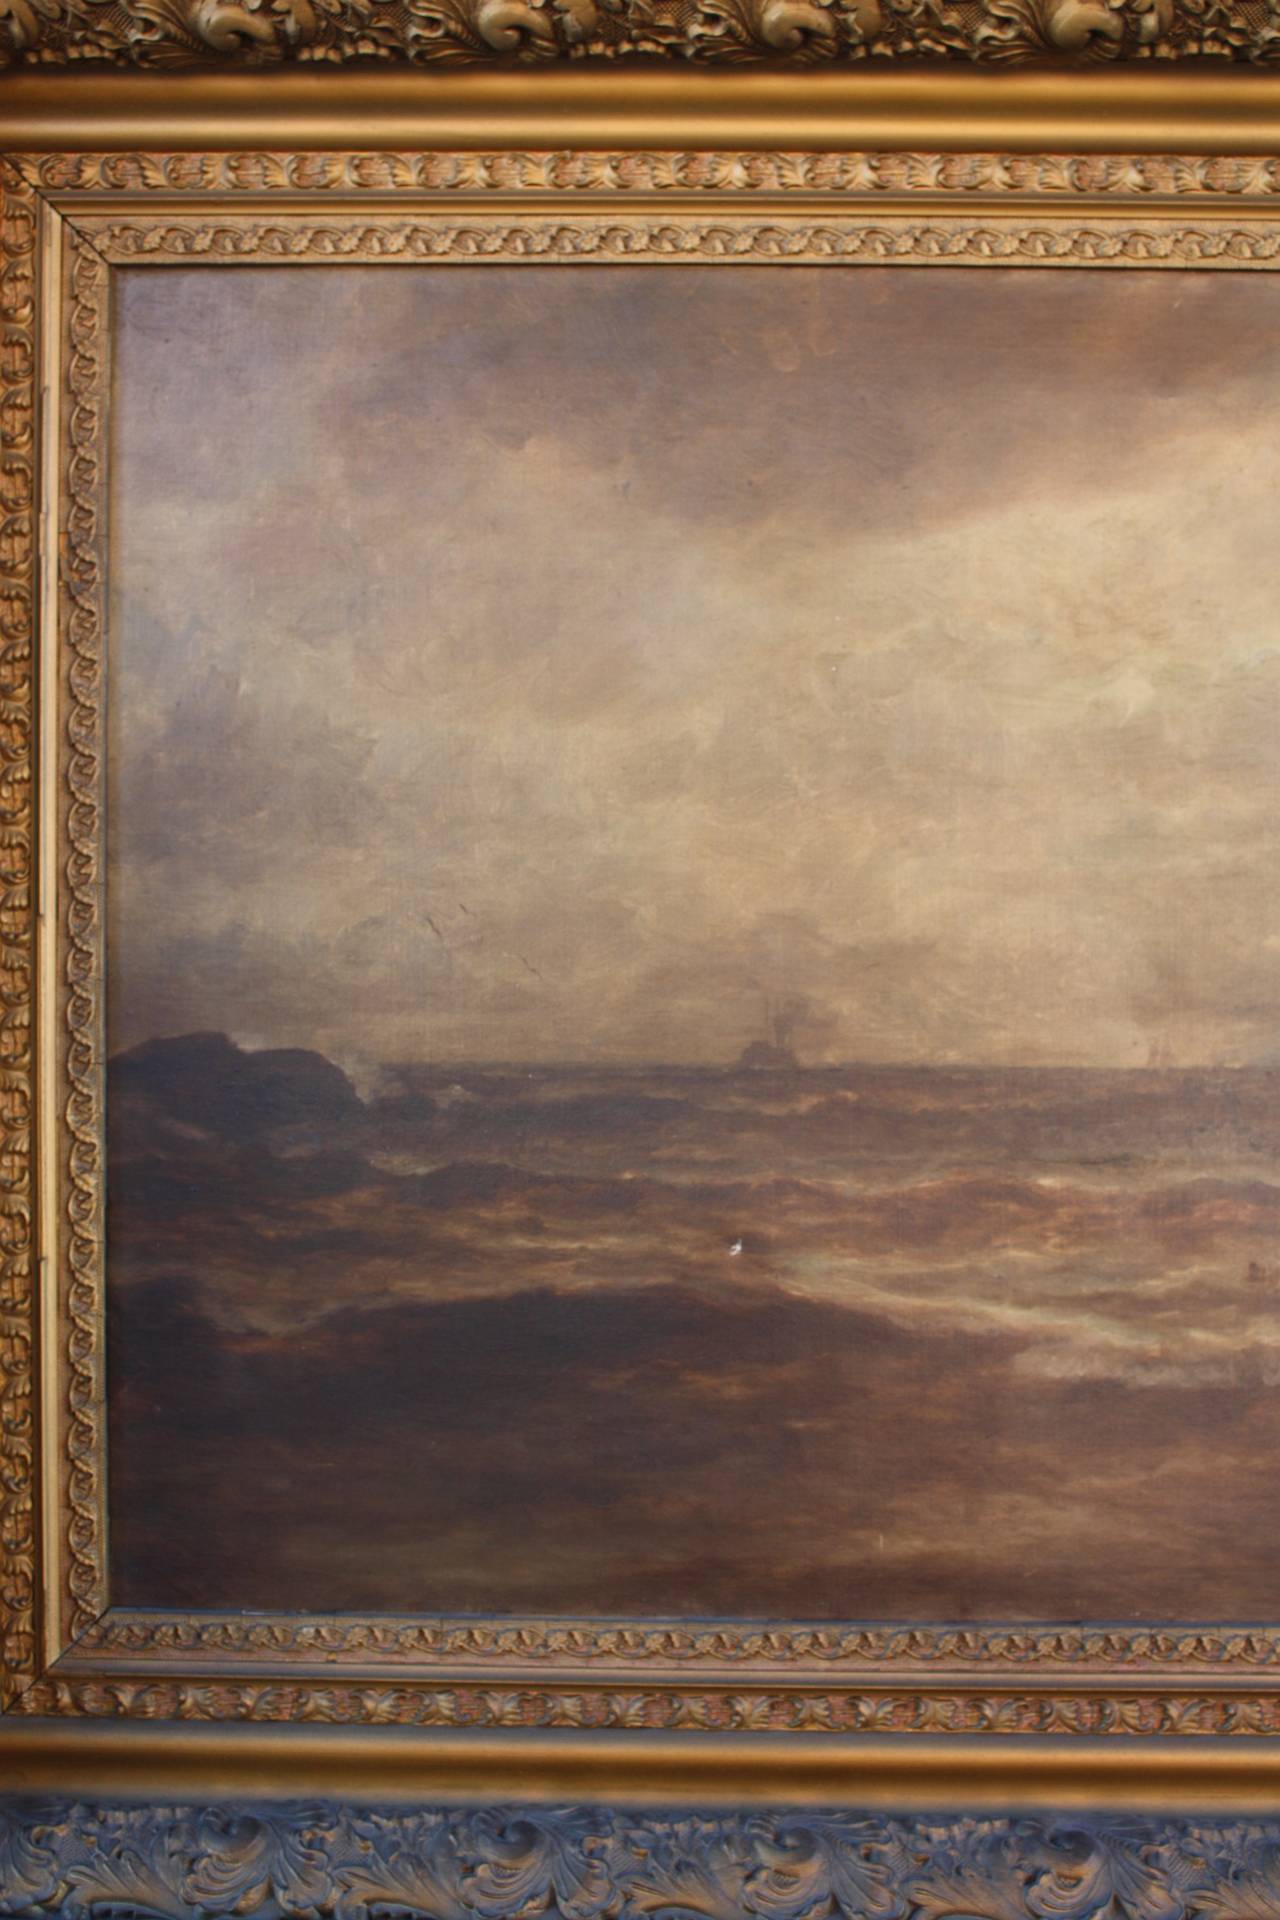 Oil painting by PF Lund in original gilt frame,1894. The Painting has not been cleaned. Frame measures 47.5” W x 35.75” H Image is 35.5” W x 23.5”